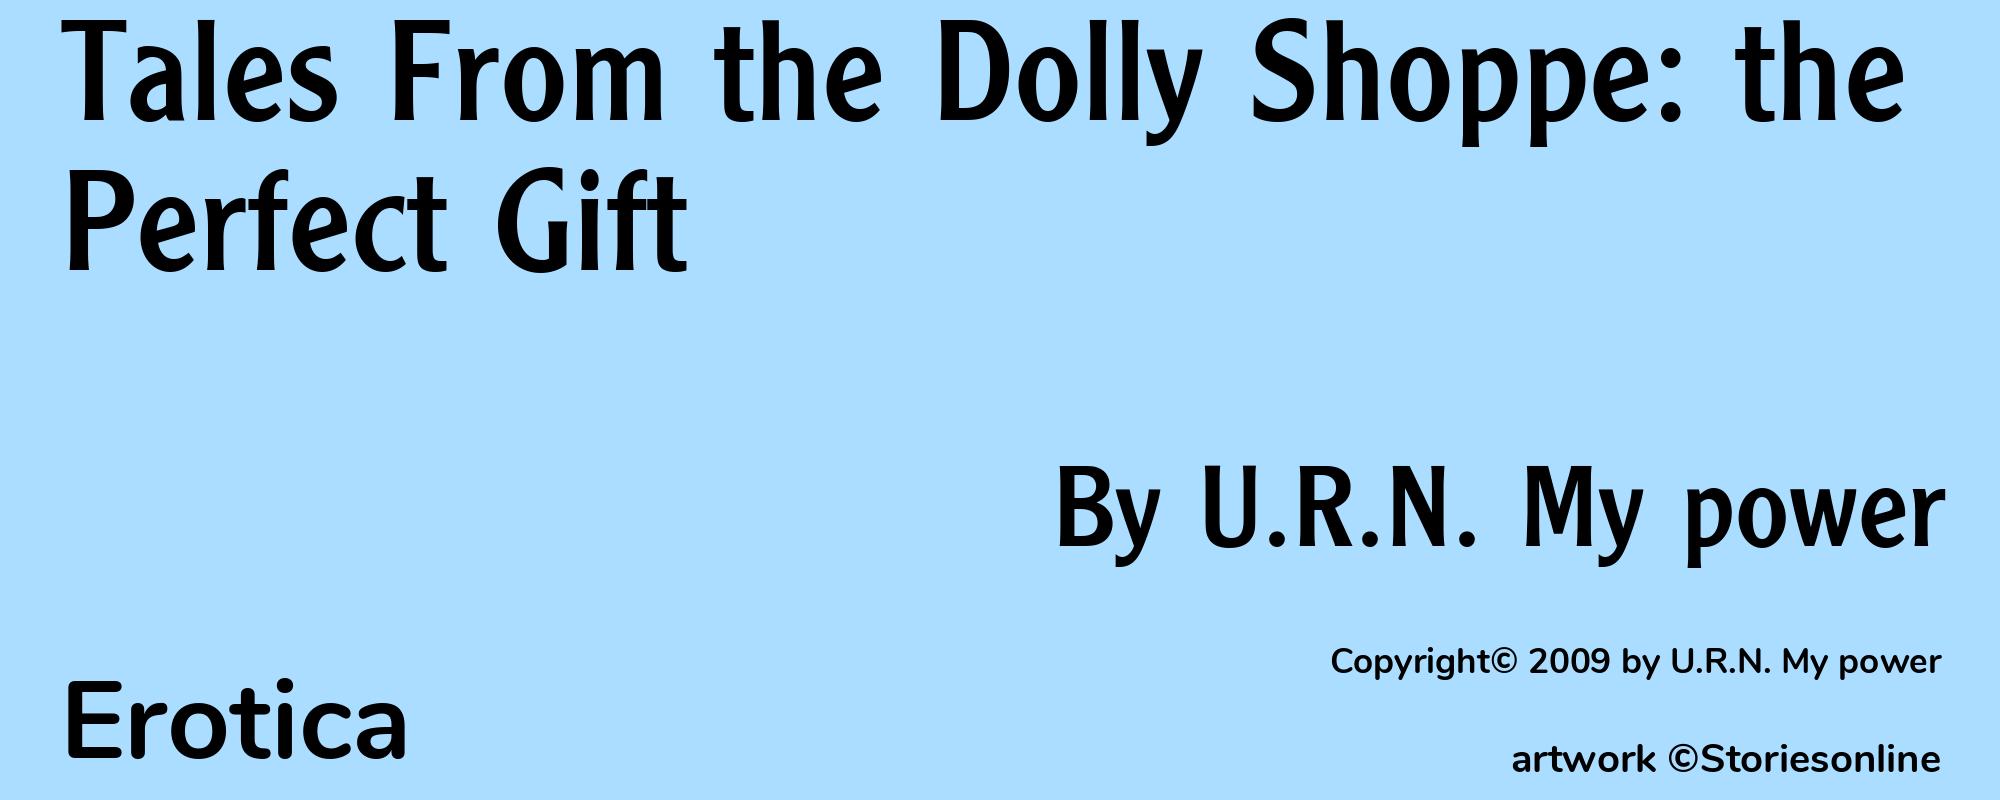 Tales From the Dolly Shoppe: the Perfect Gift - Cover